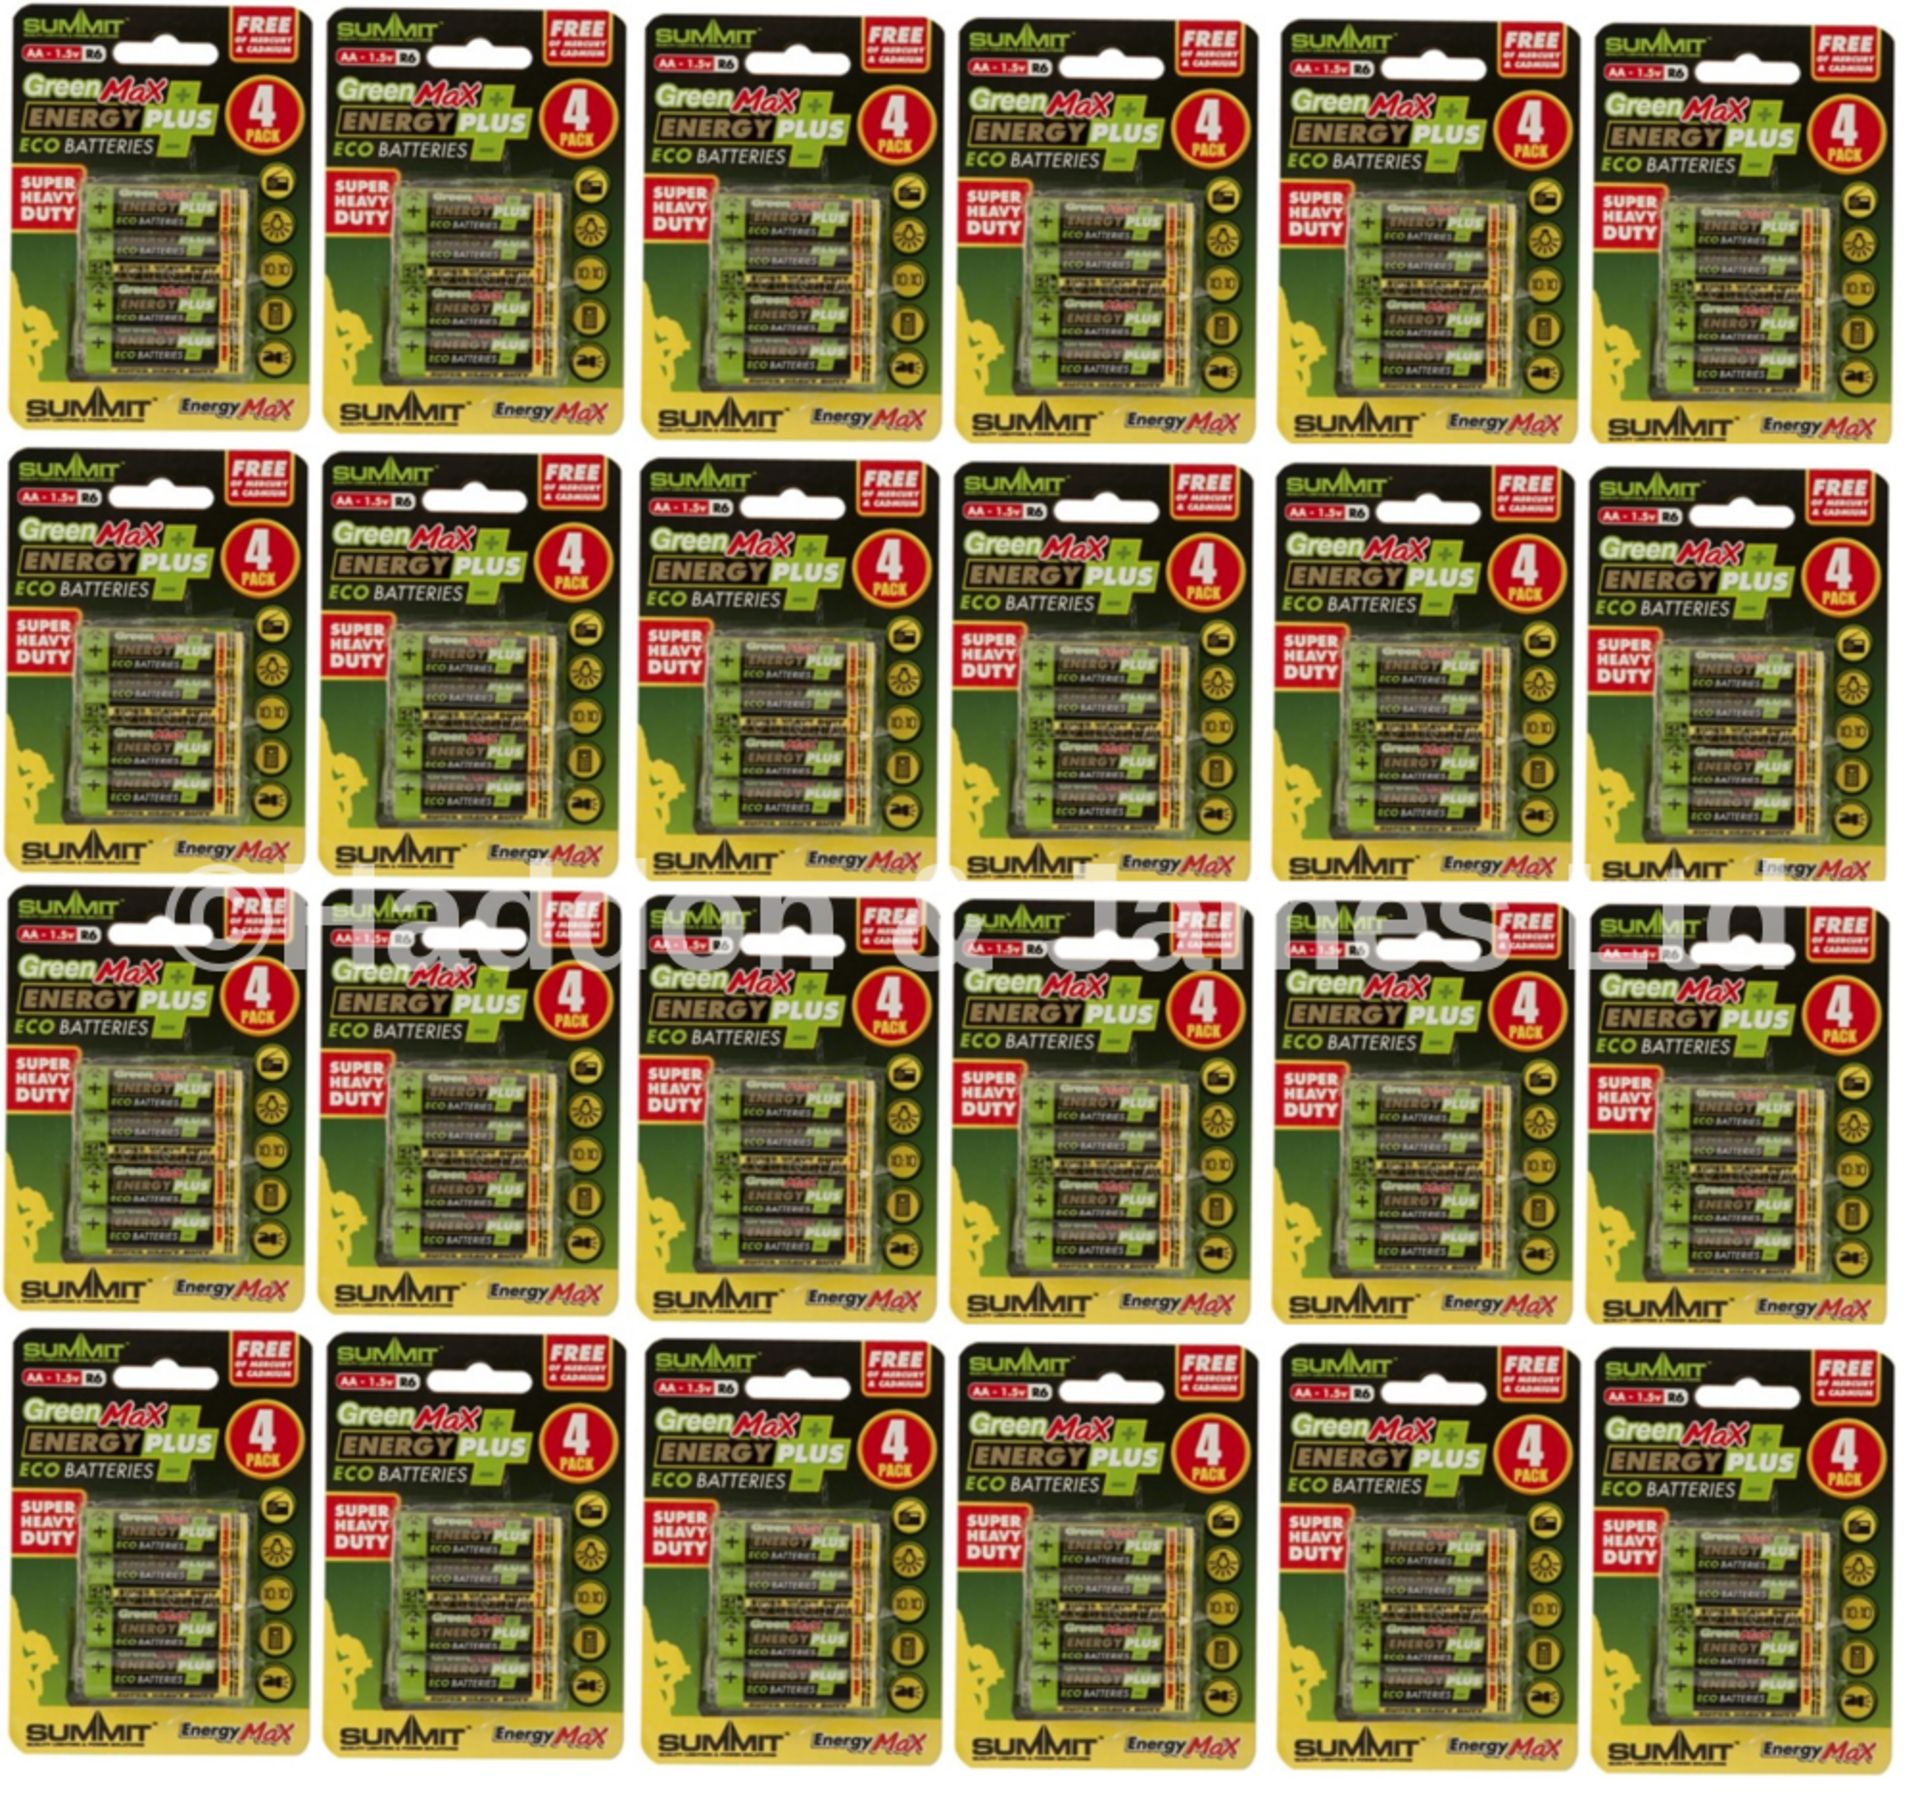 V *TRADE QTY* Brand New Ninety Six Energy Plus Batteries (24 Cards Of 4) X 3 YOUR BID PRICE TO BE